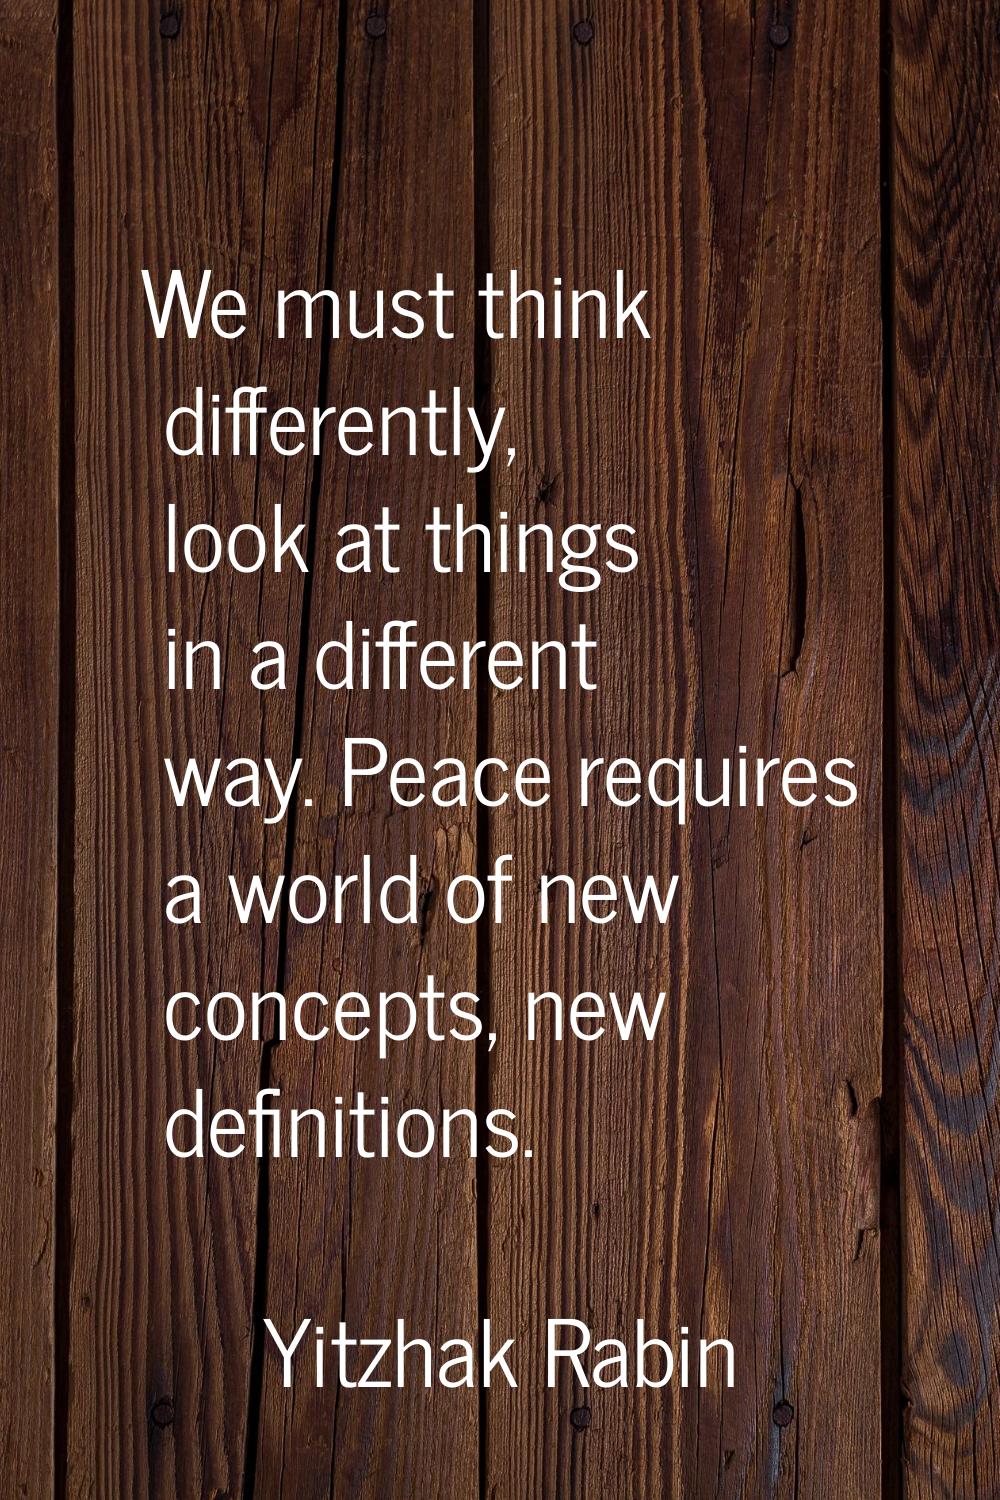 We must think differently, look at things in a different way. Peace requires a world of new concept